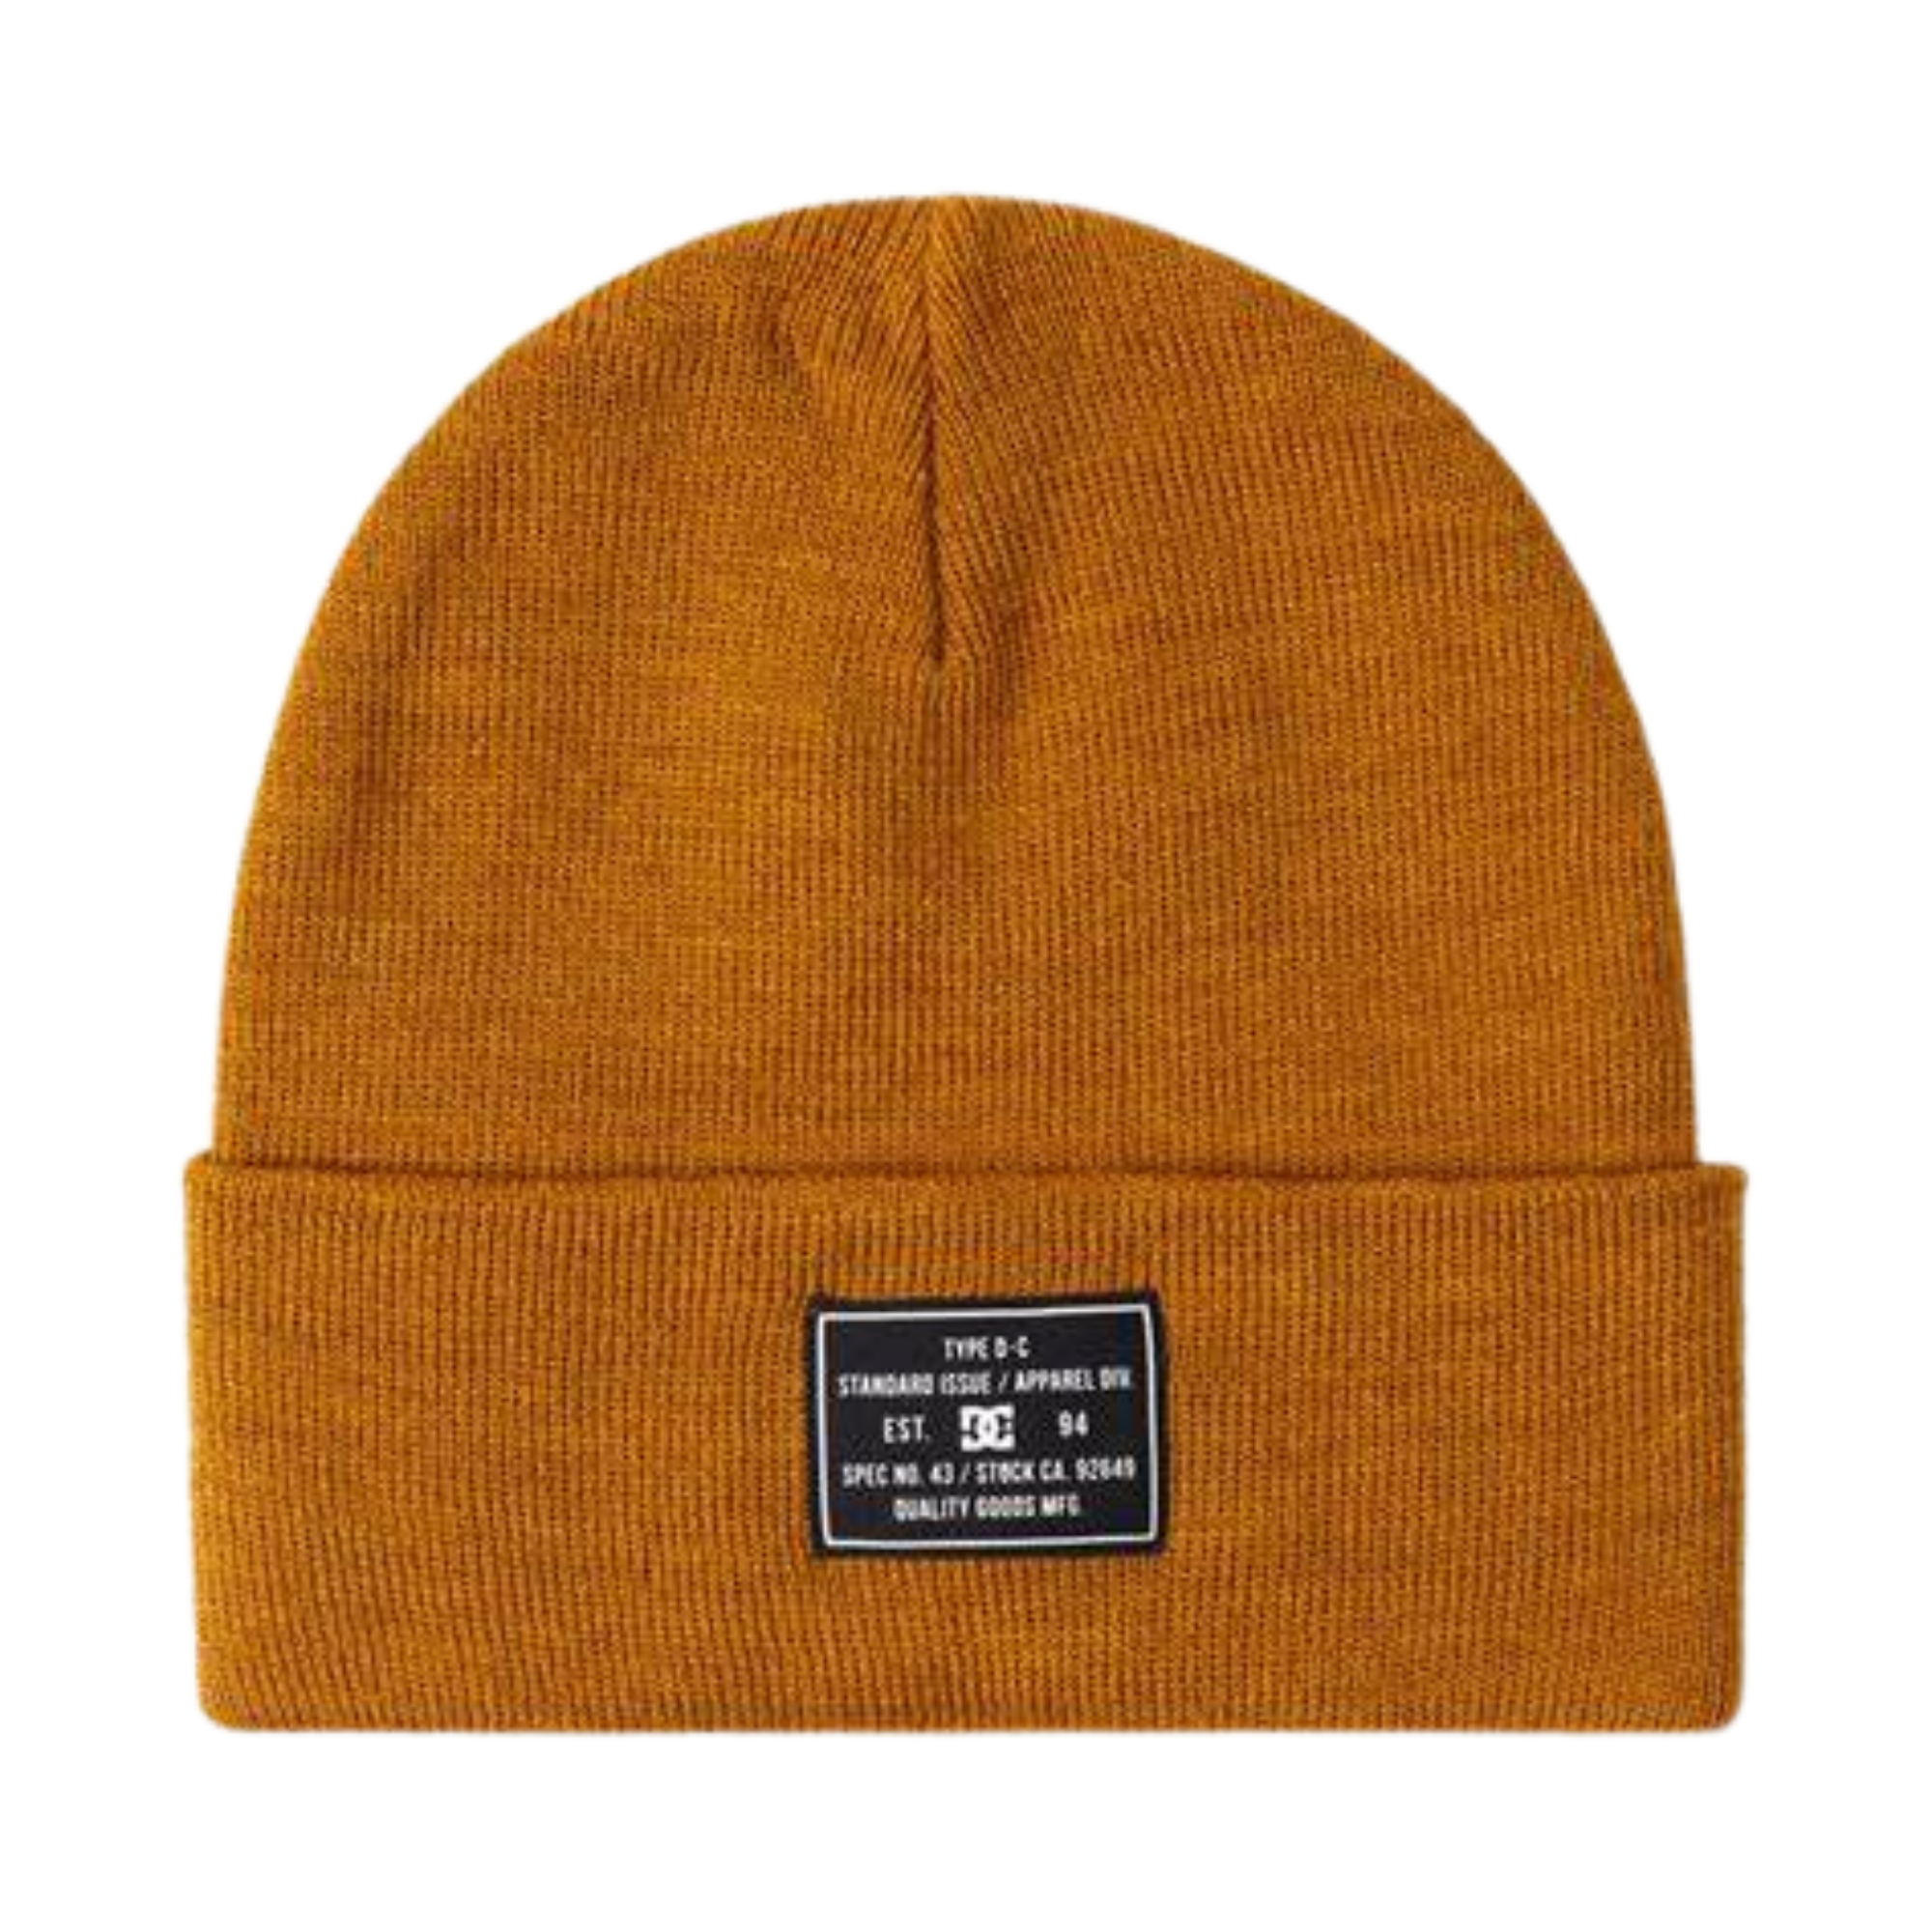 DC Label Beanie - Cathay Spice